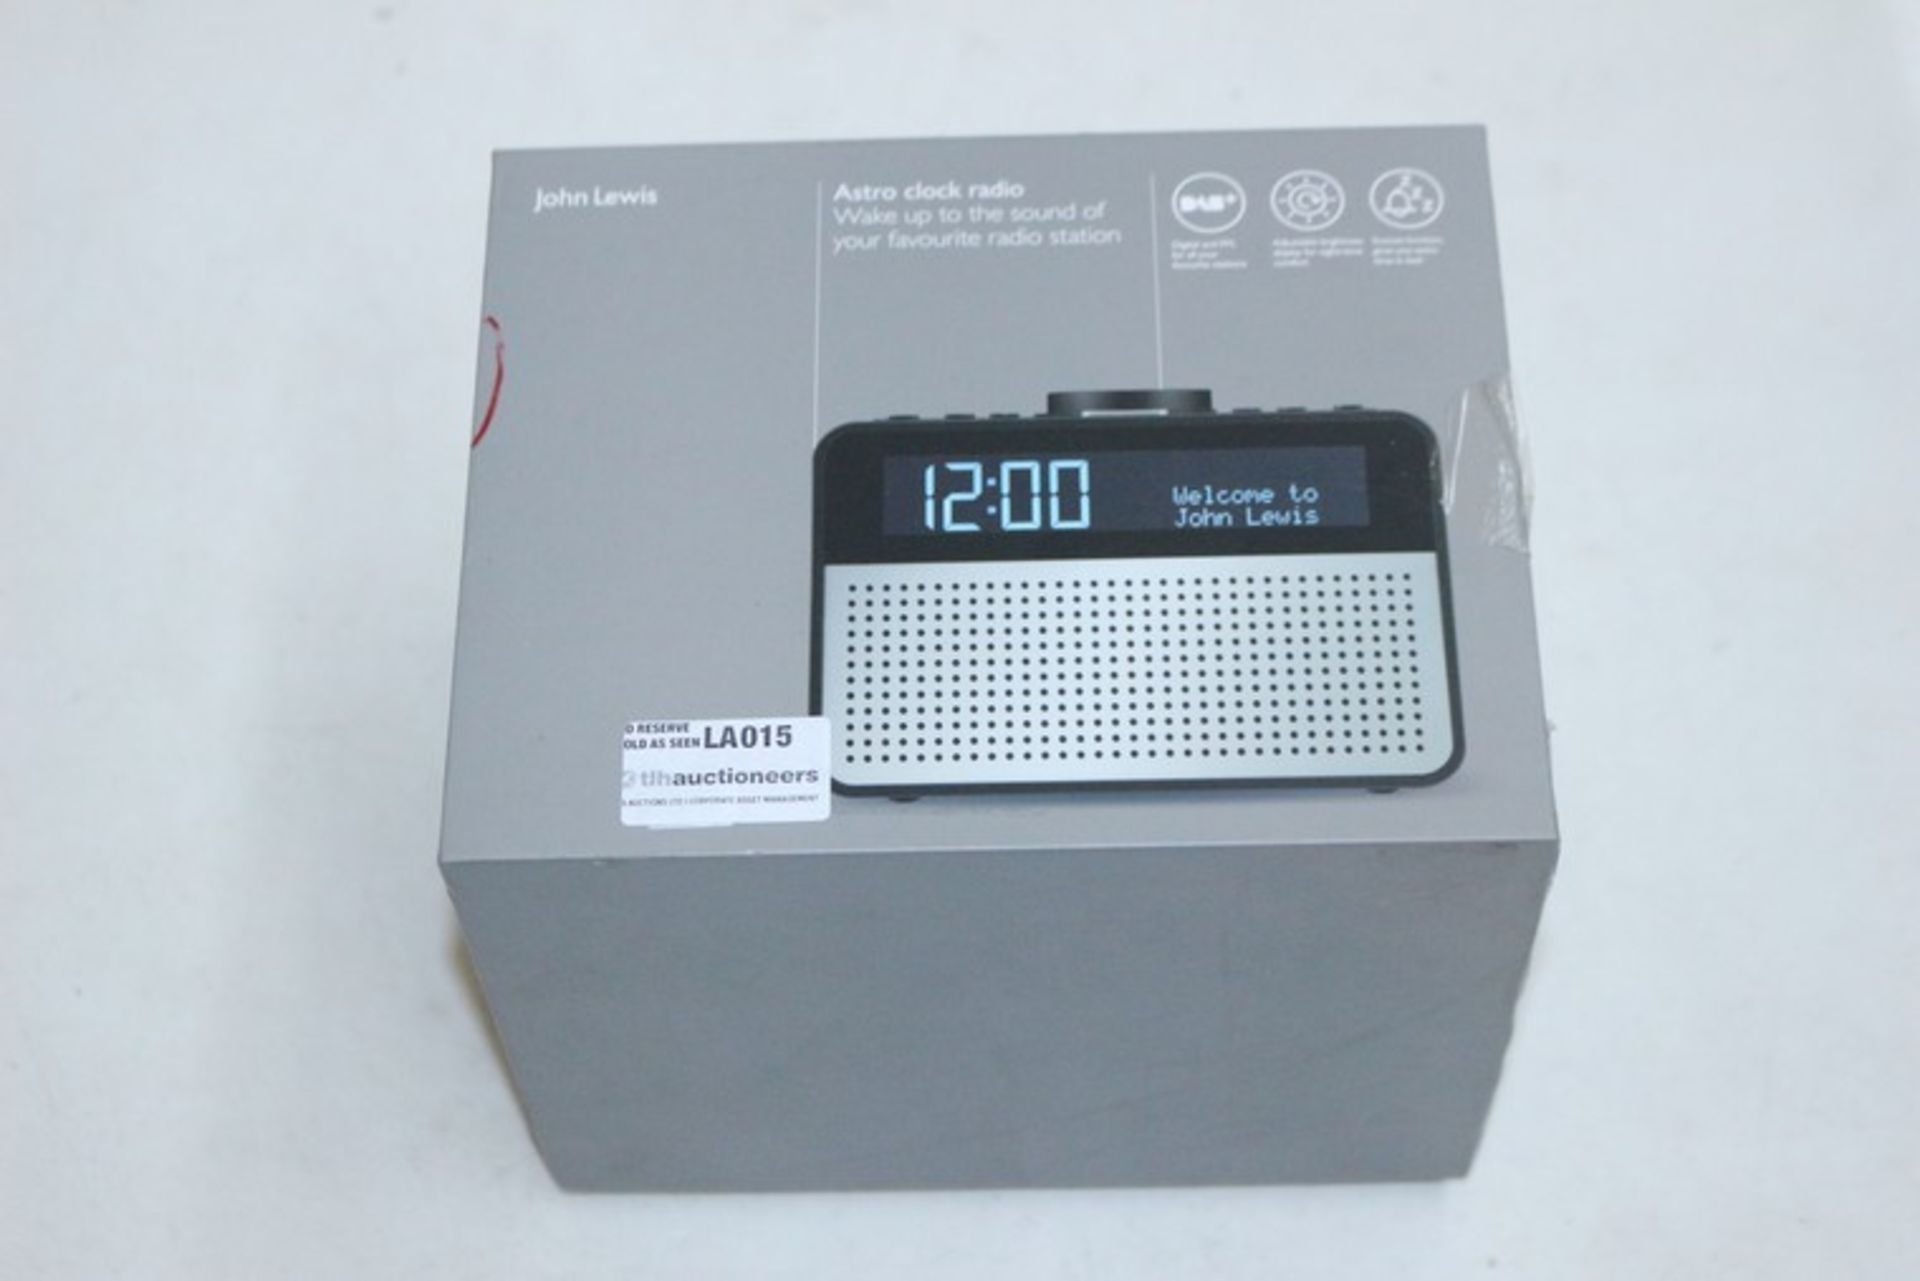 2 x BOXED ASTRO RADIO DAB FM ALARM CLOCK *PLEASE NOTE THAT THE BID PRICE IS MULTIPLIED BY THE NUMBER